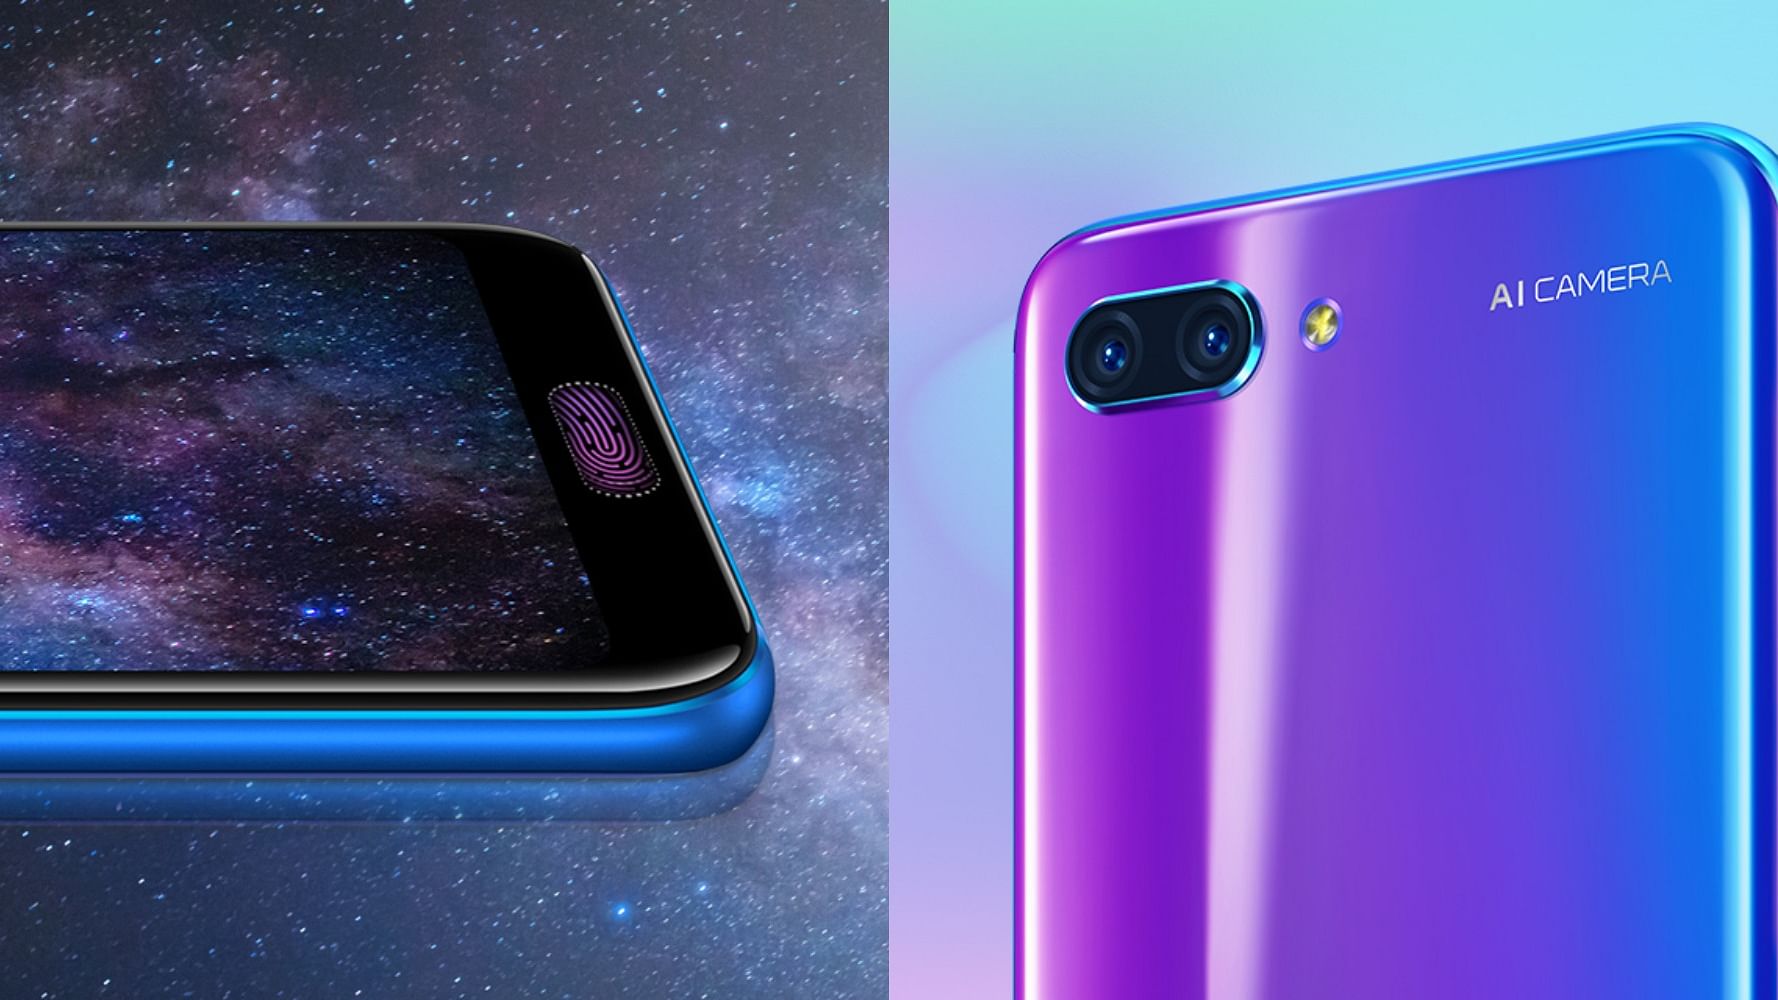 Honor 10 is the epitome of cutting-edge design.